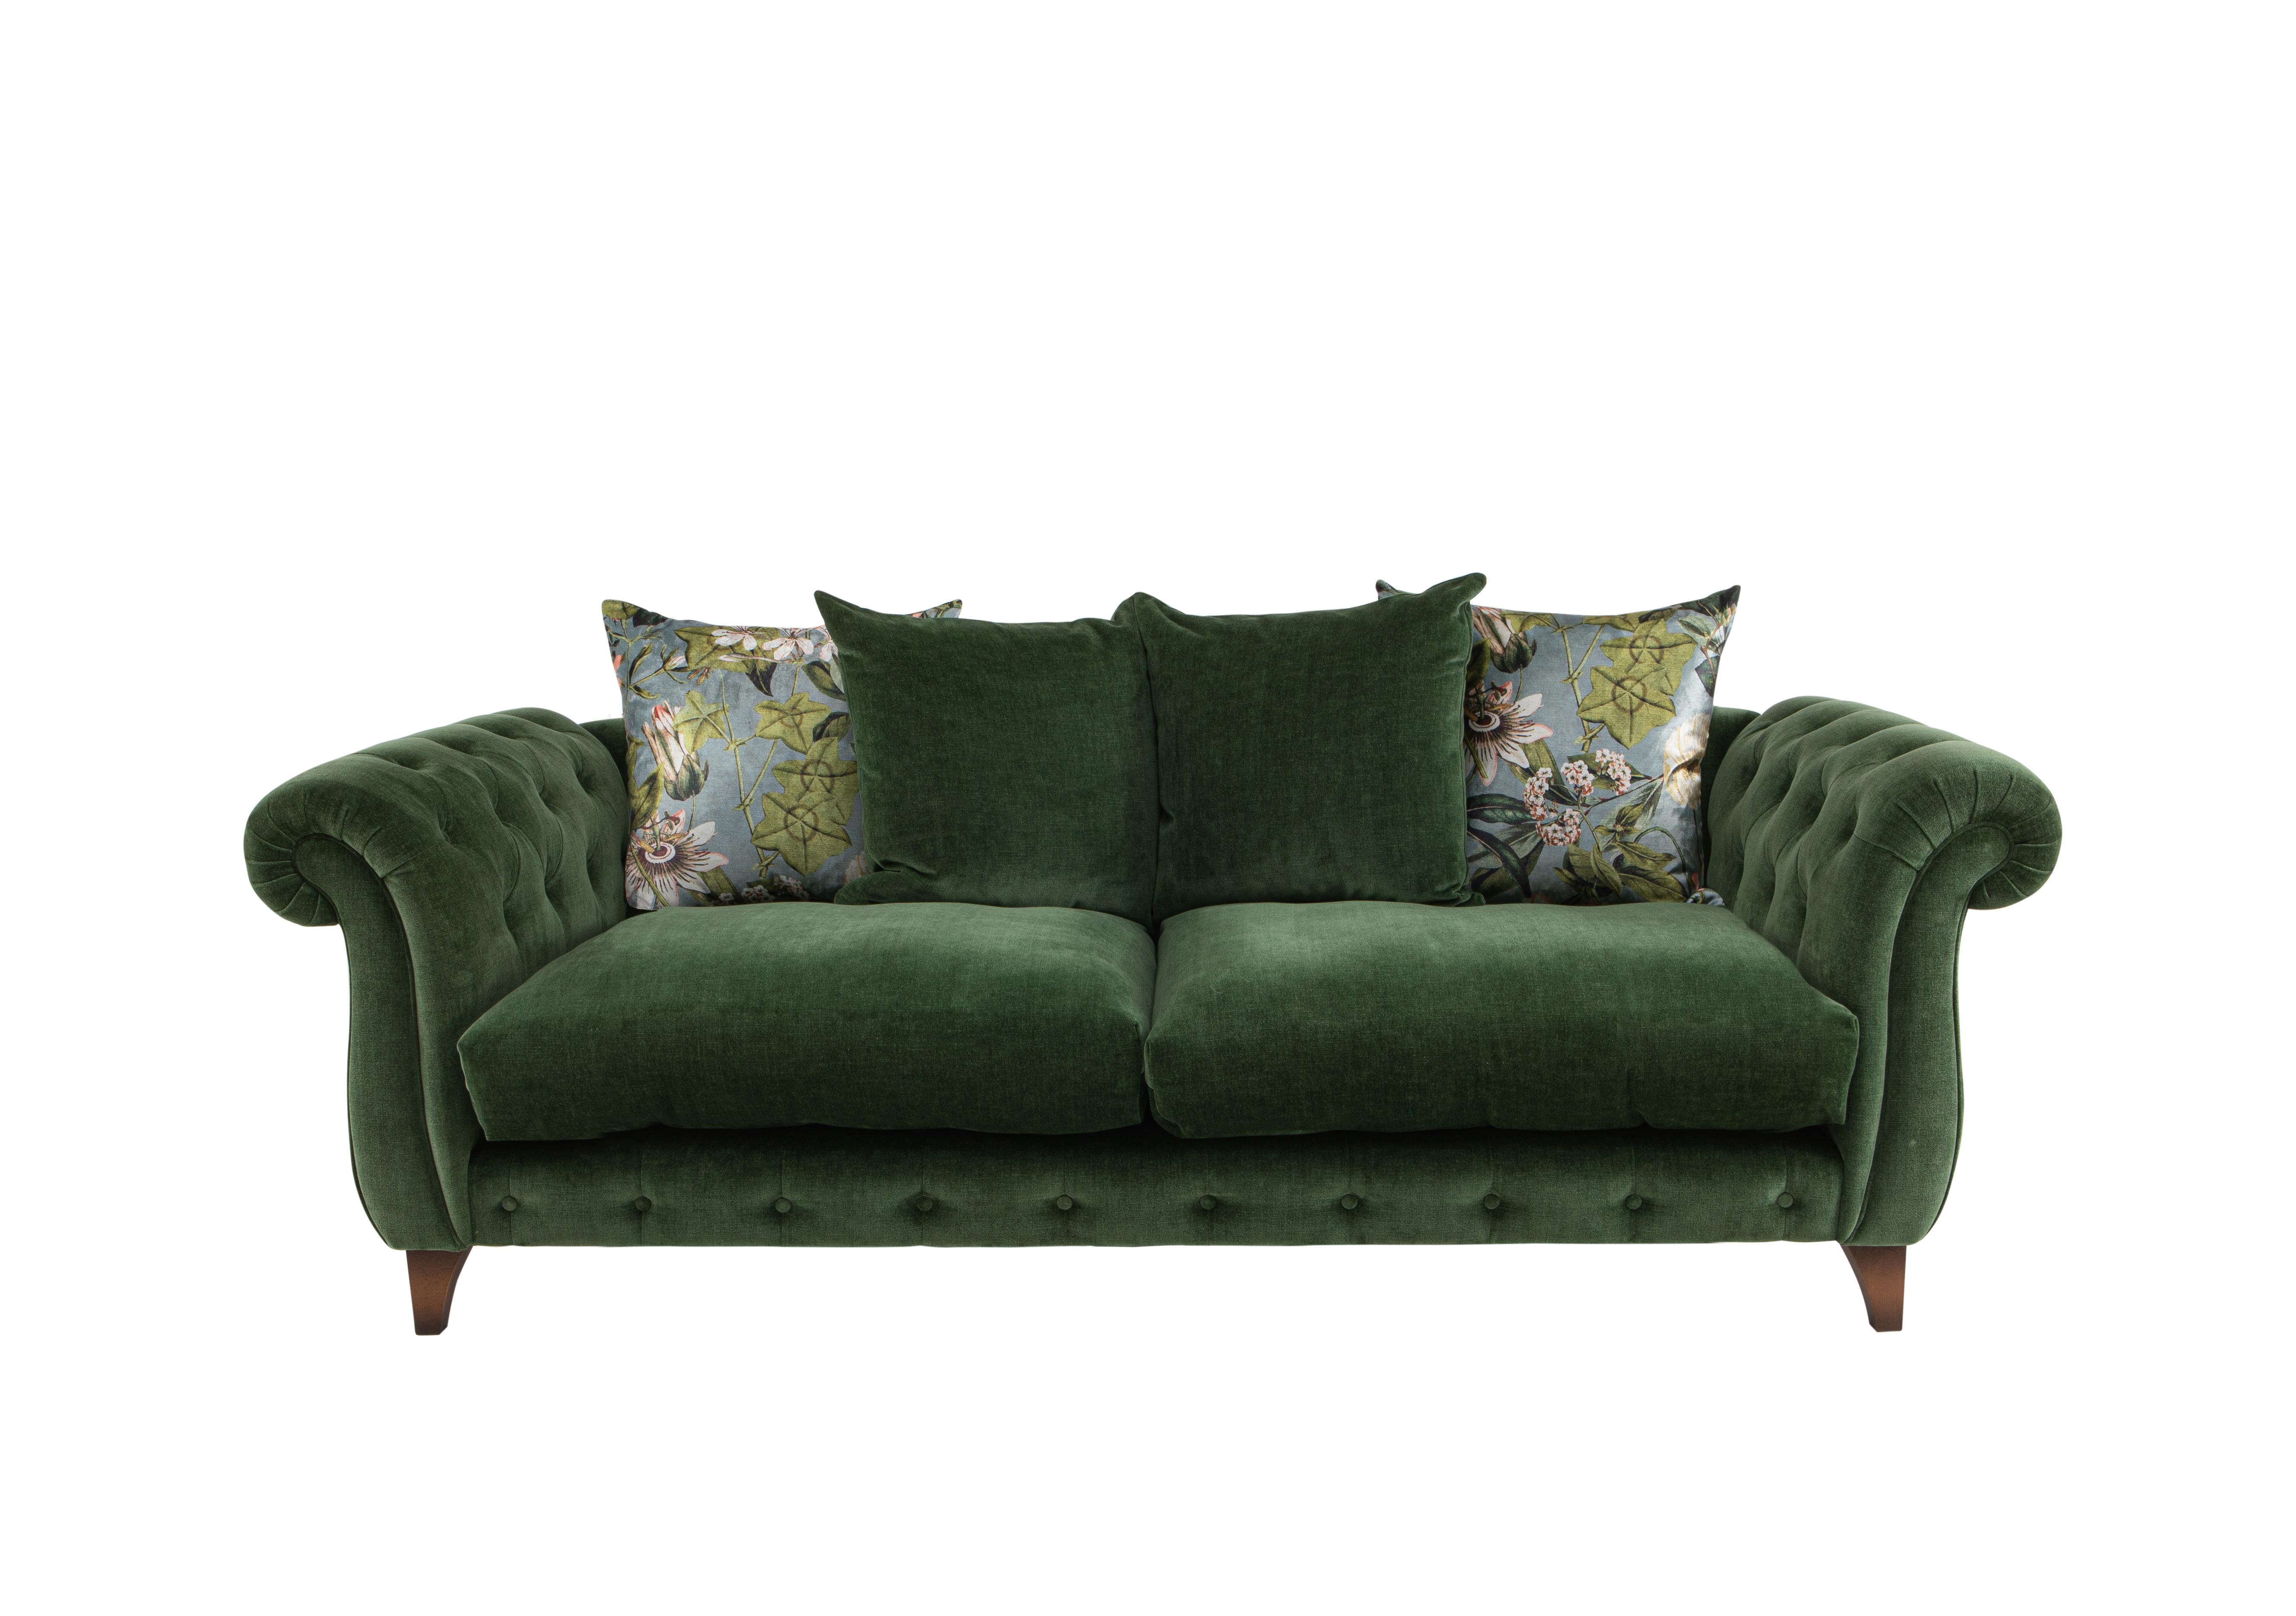 Boutique Palace Fabric 2 Seater Scatter Back Sofa in Oasis Parrot on Furniture Village